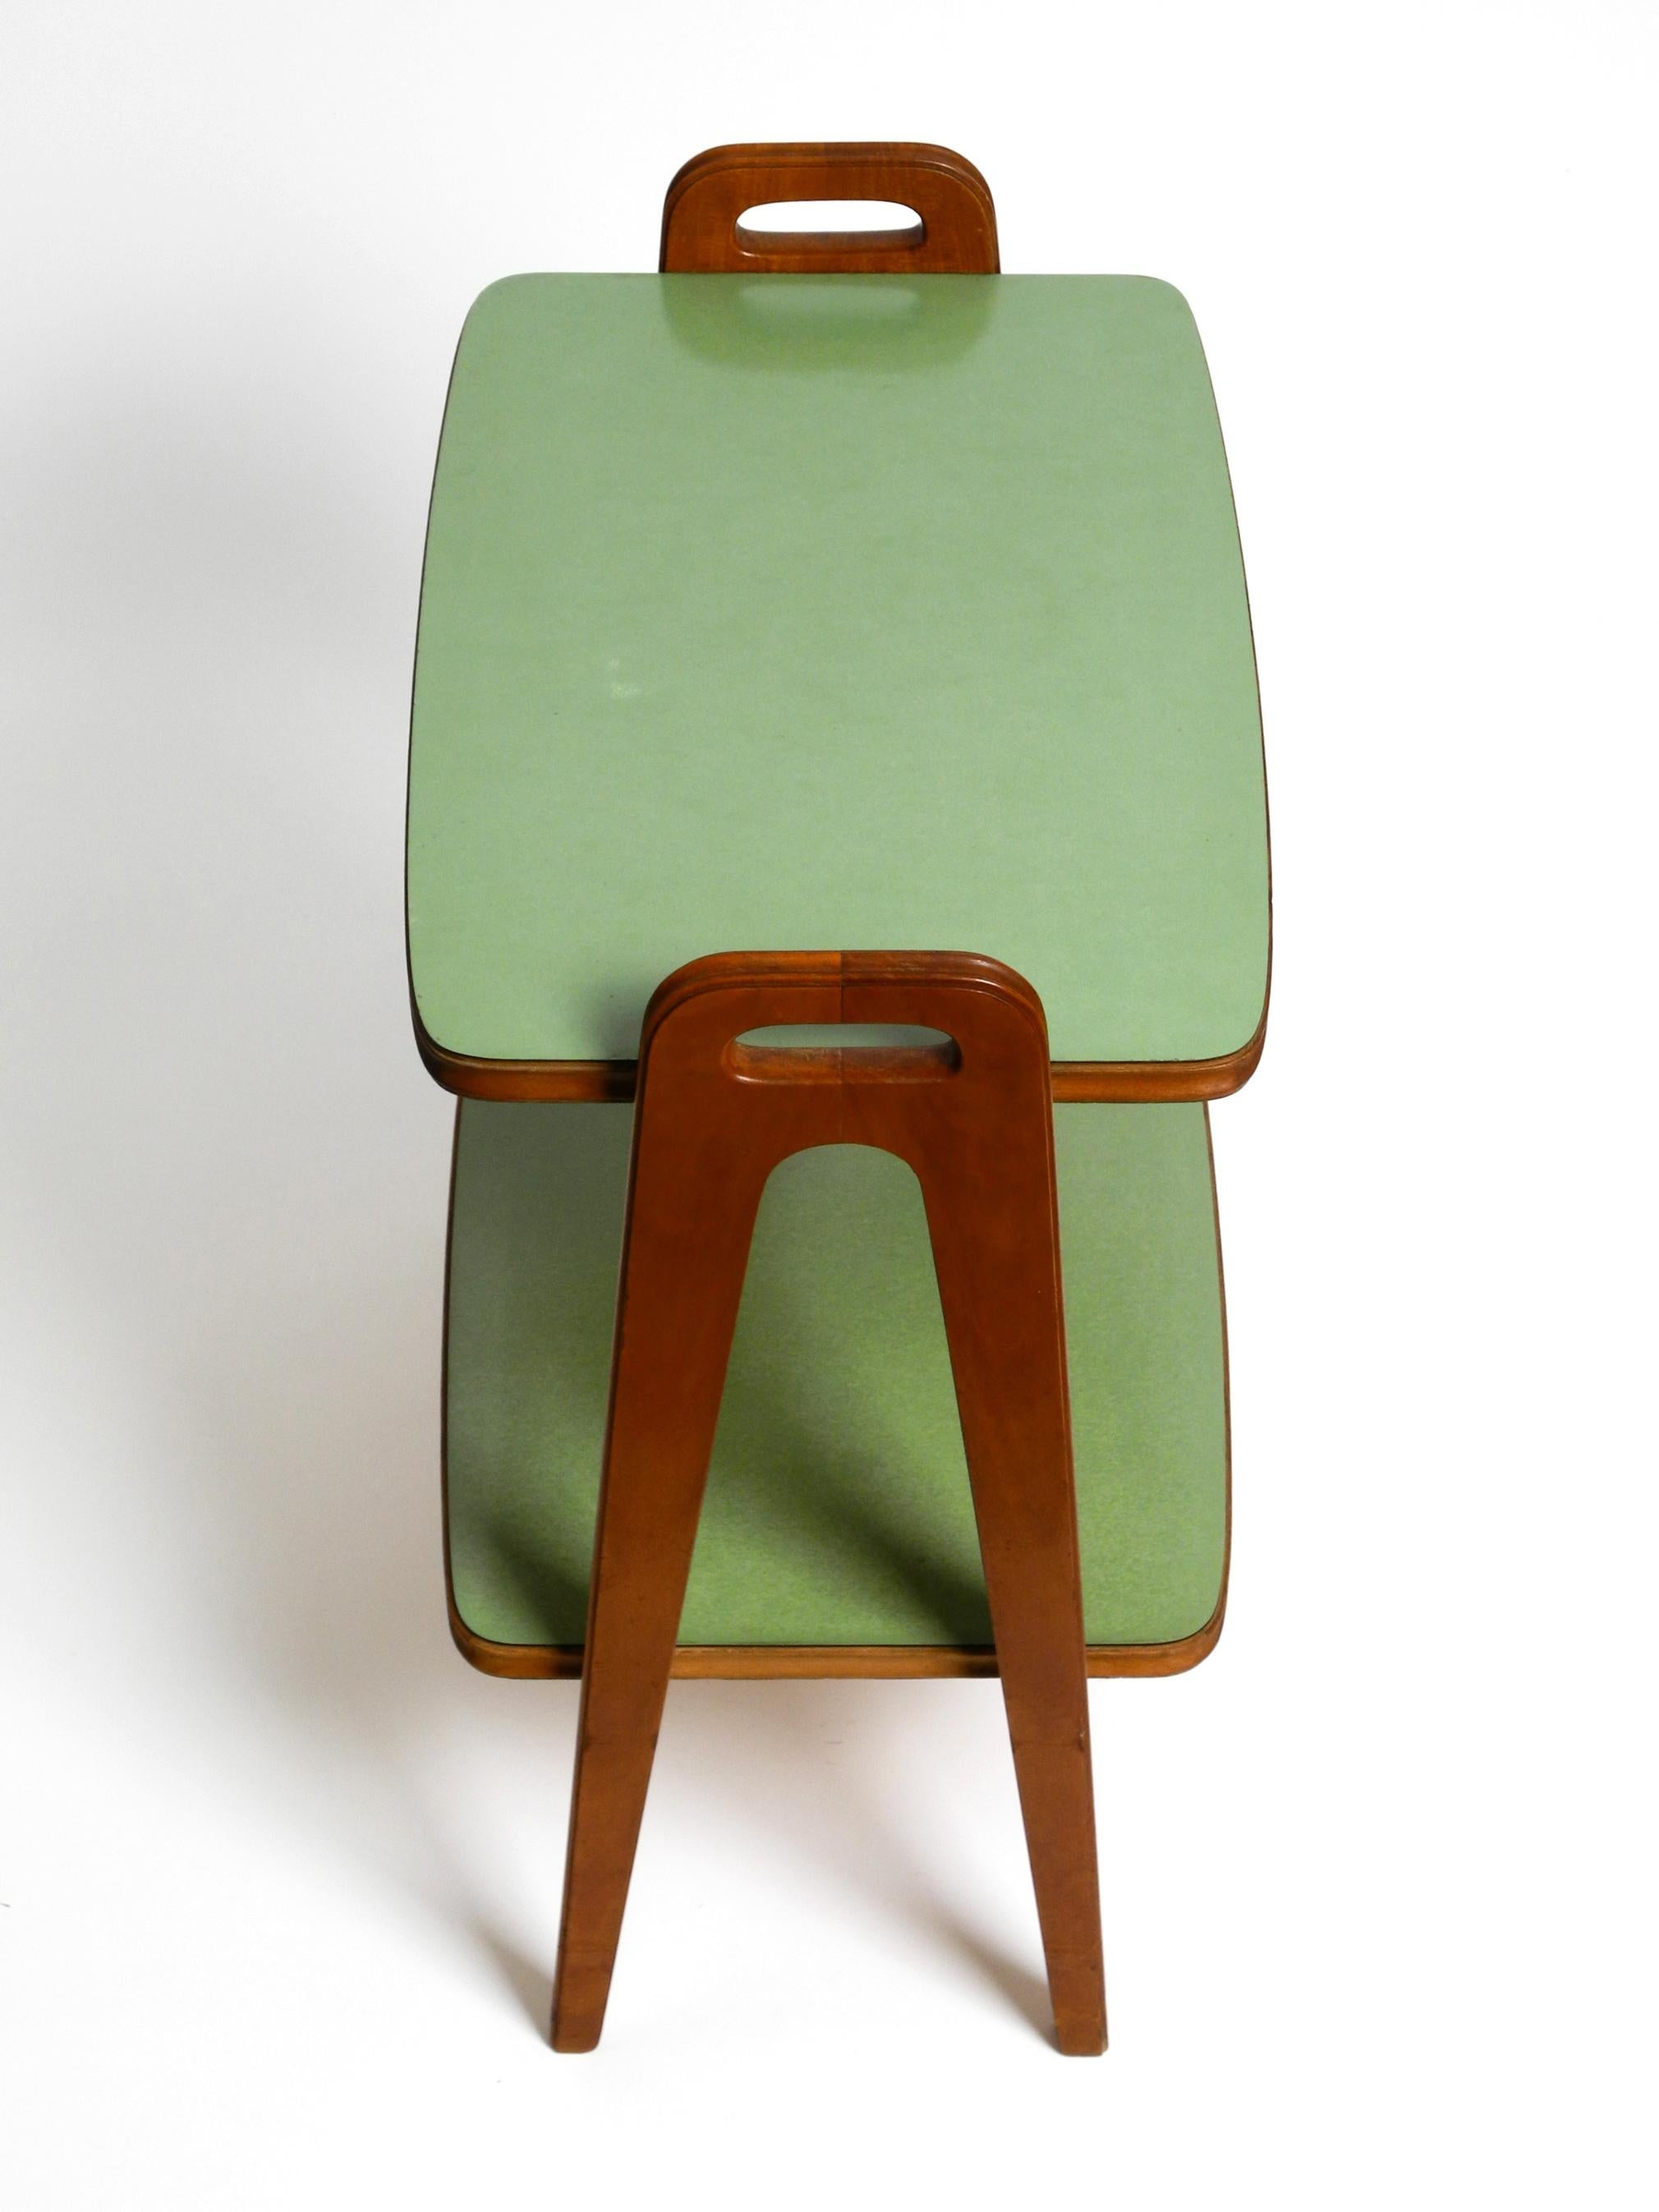 Small Mid Century Modern side table made of walnut with green Formica surfaces 9